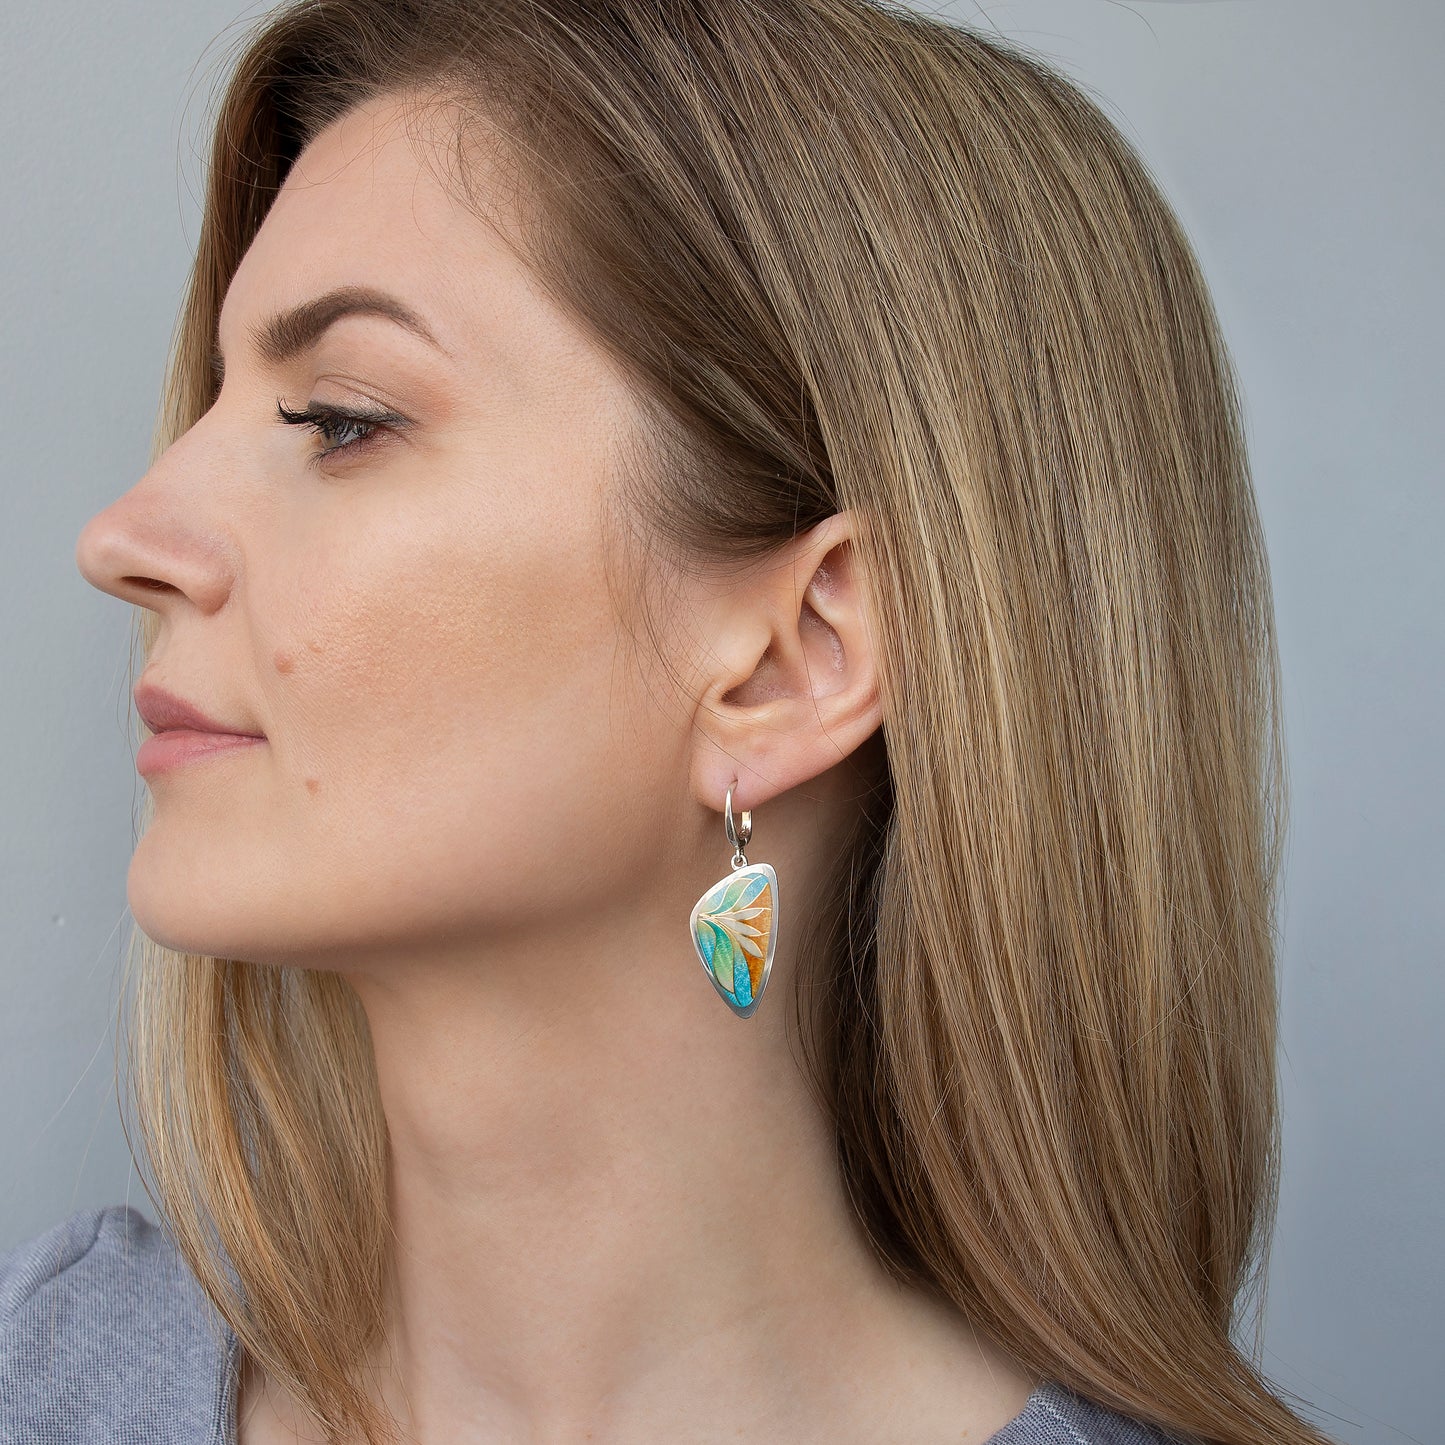 Turquoise Orange Cloisonné Enamel Earrings With Gold Pattern